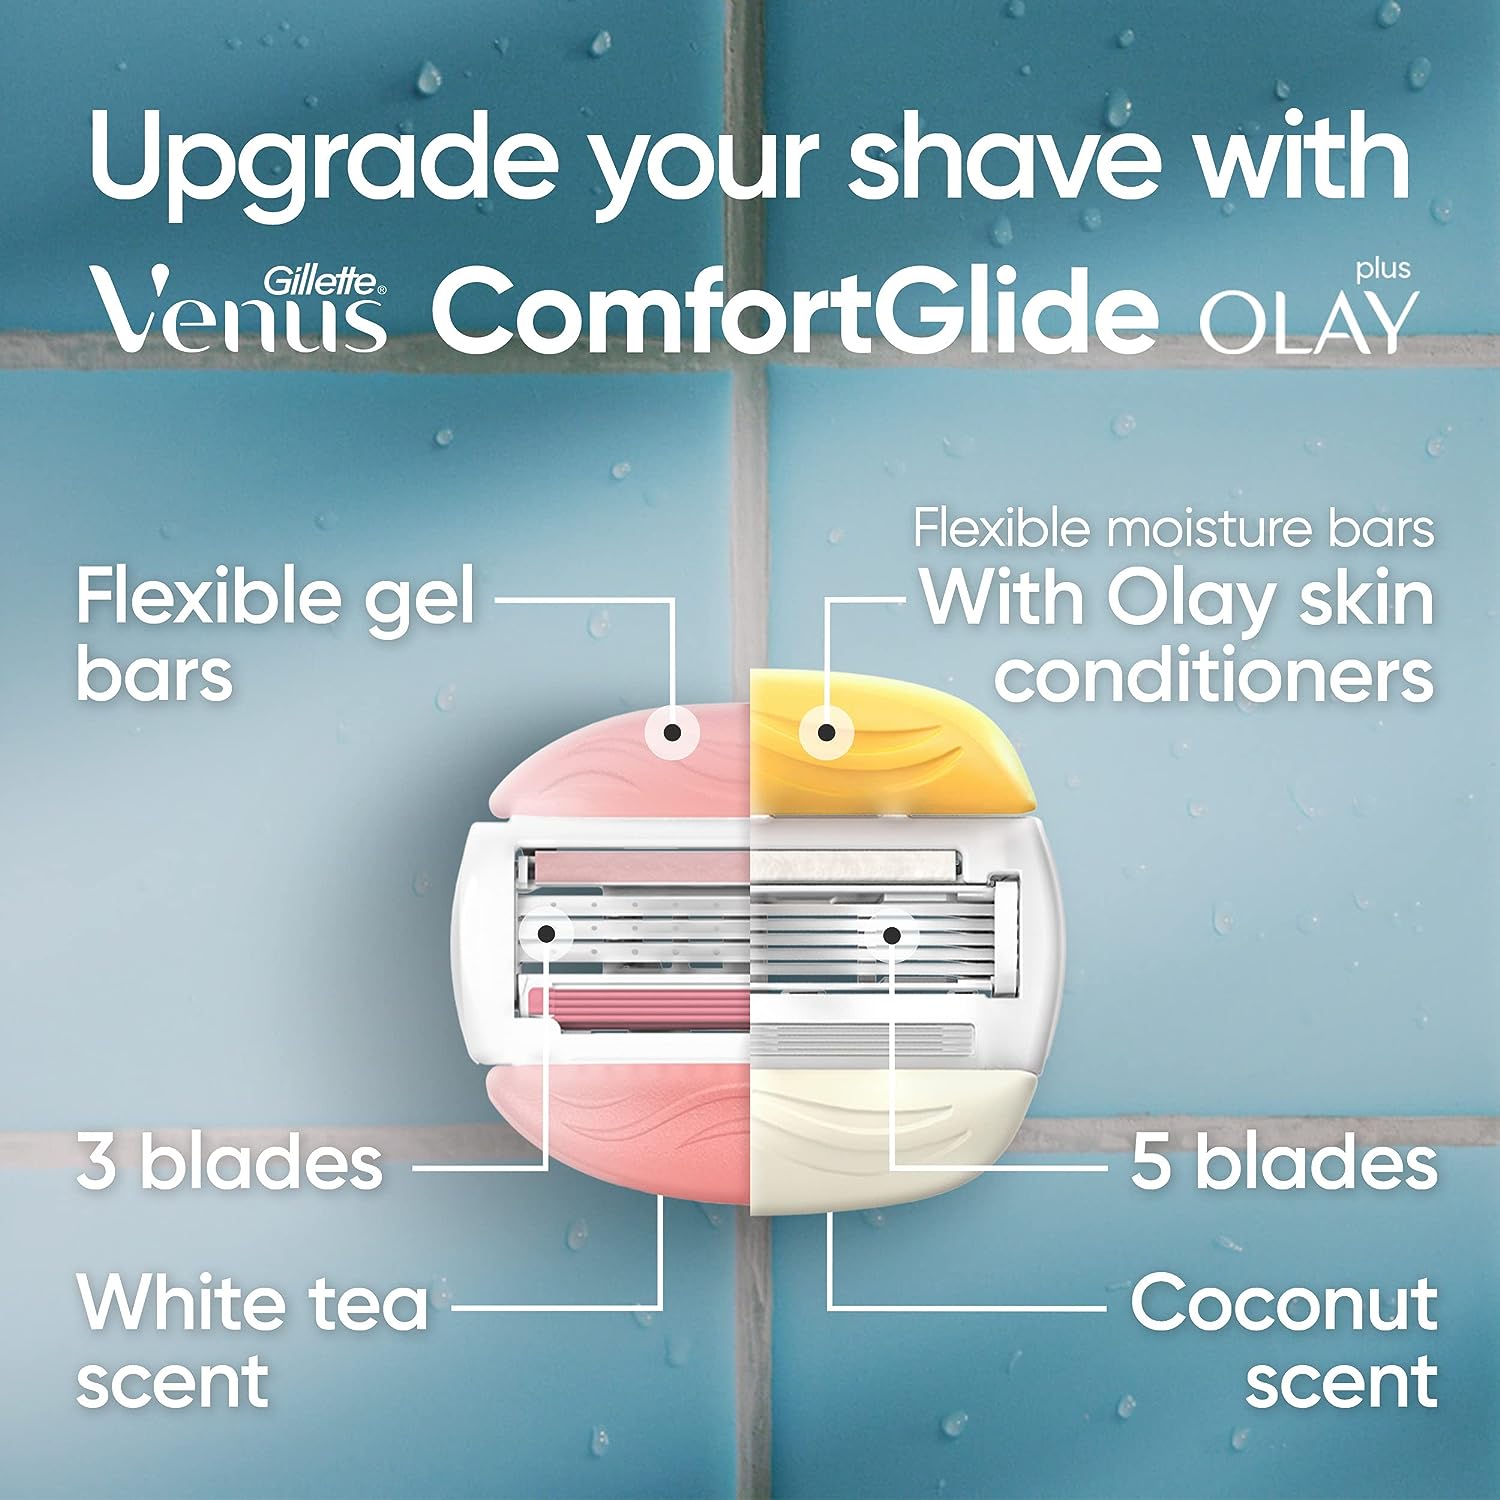 Wholesale prices with free shipping all over United States Gillette Venus ComfortGlide Womens Razor Blade Refills, 6 Count,(Pack of 1) White Tea Scented Gel Bar Protects Against Skin Irritation - Steven Deals